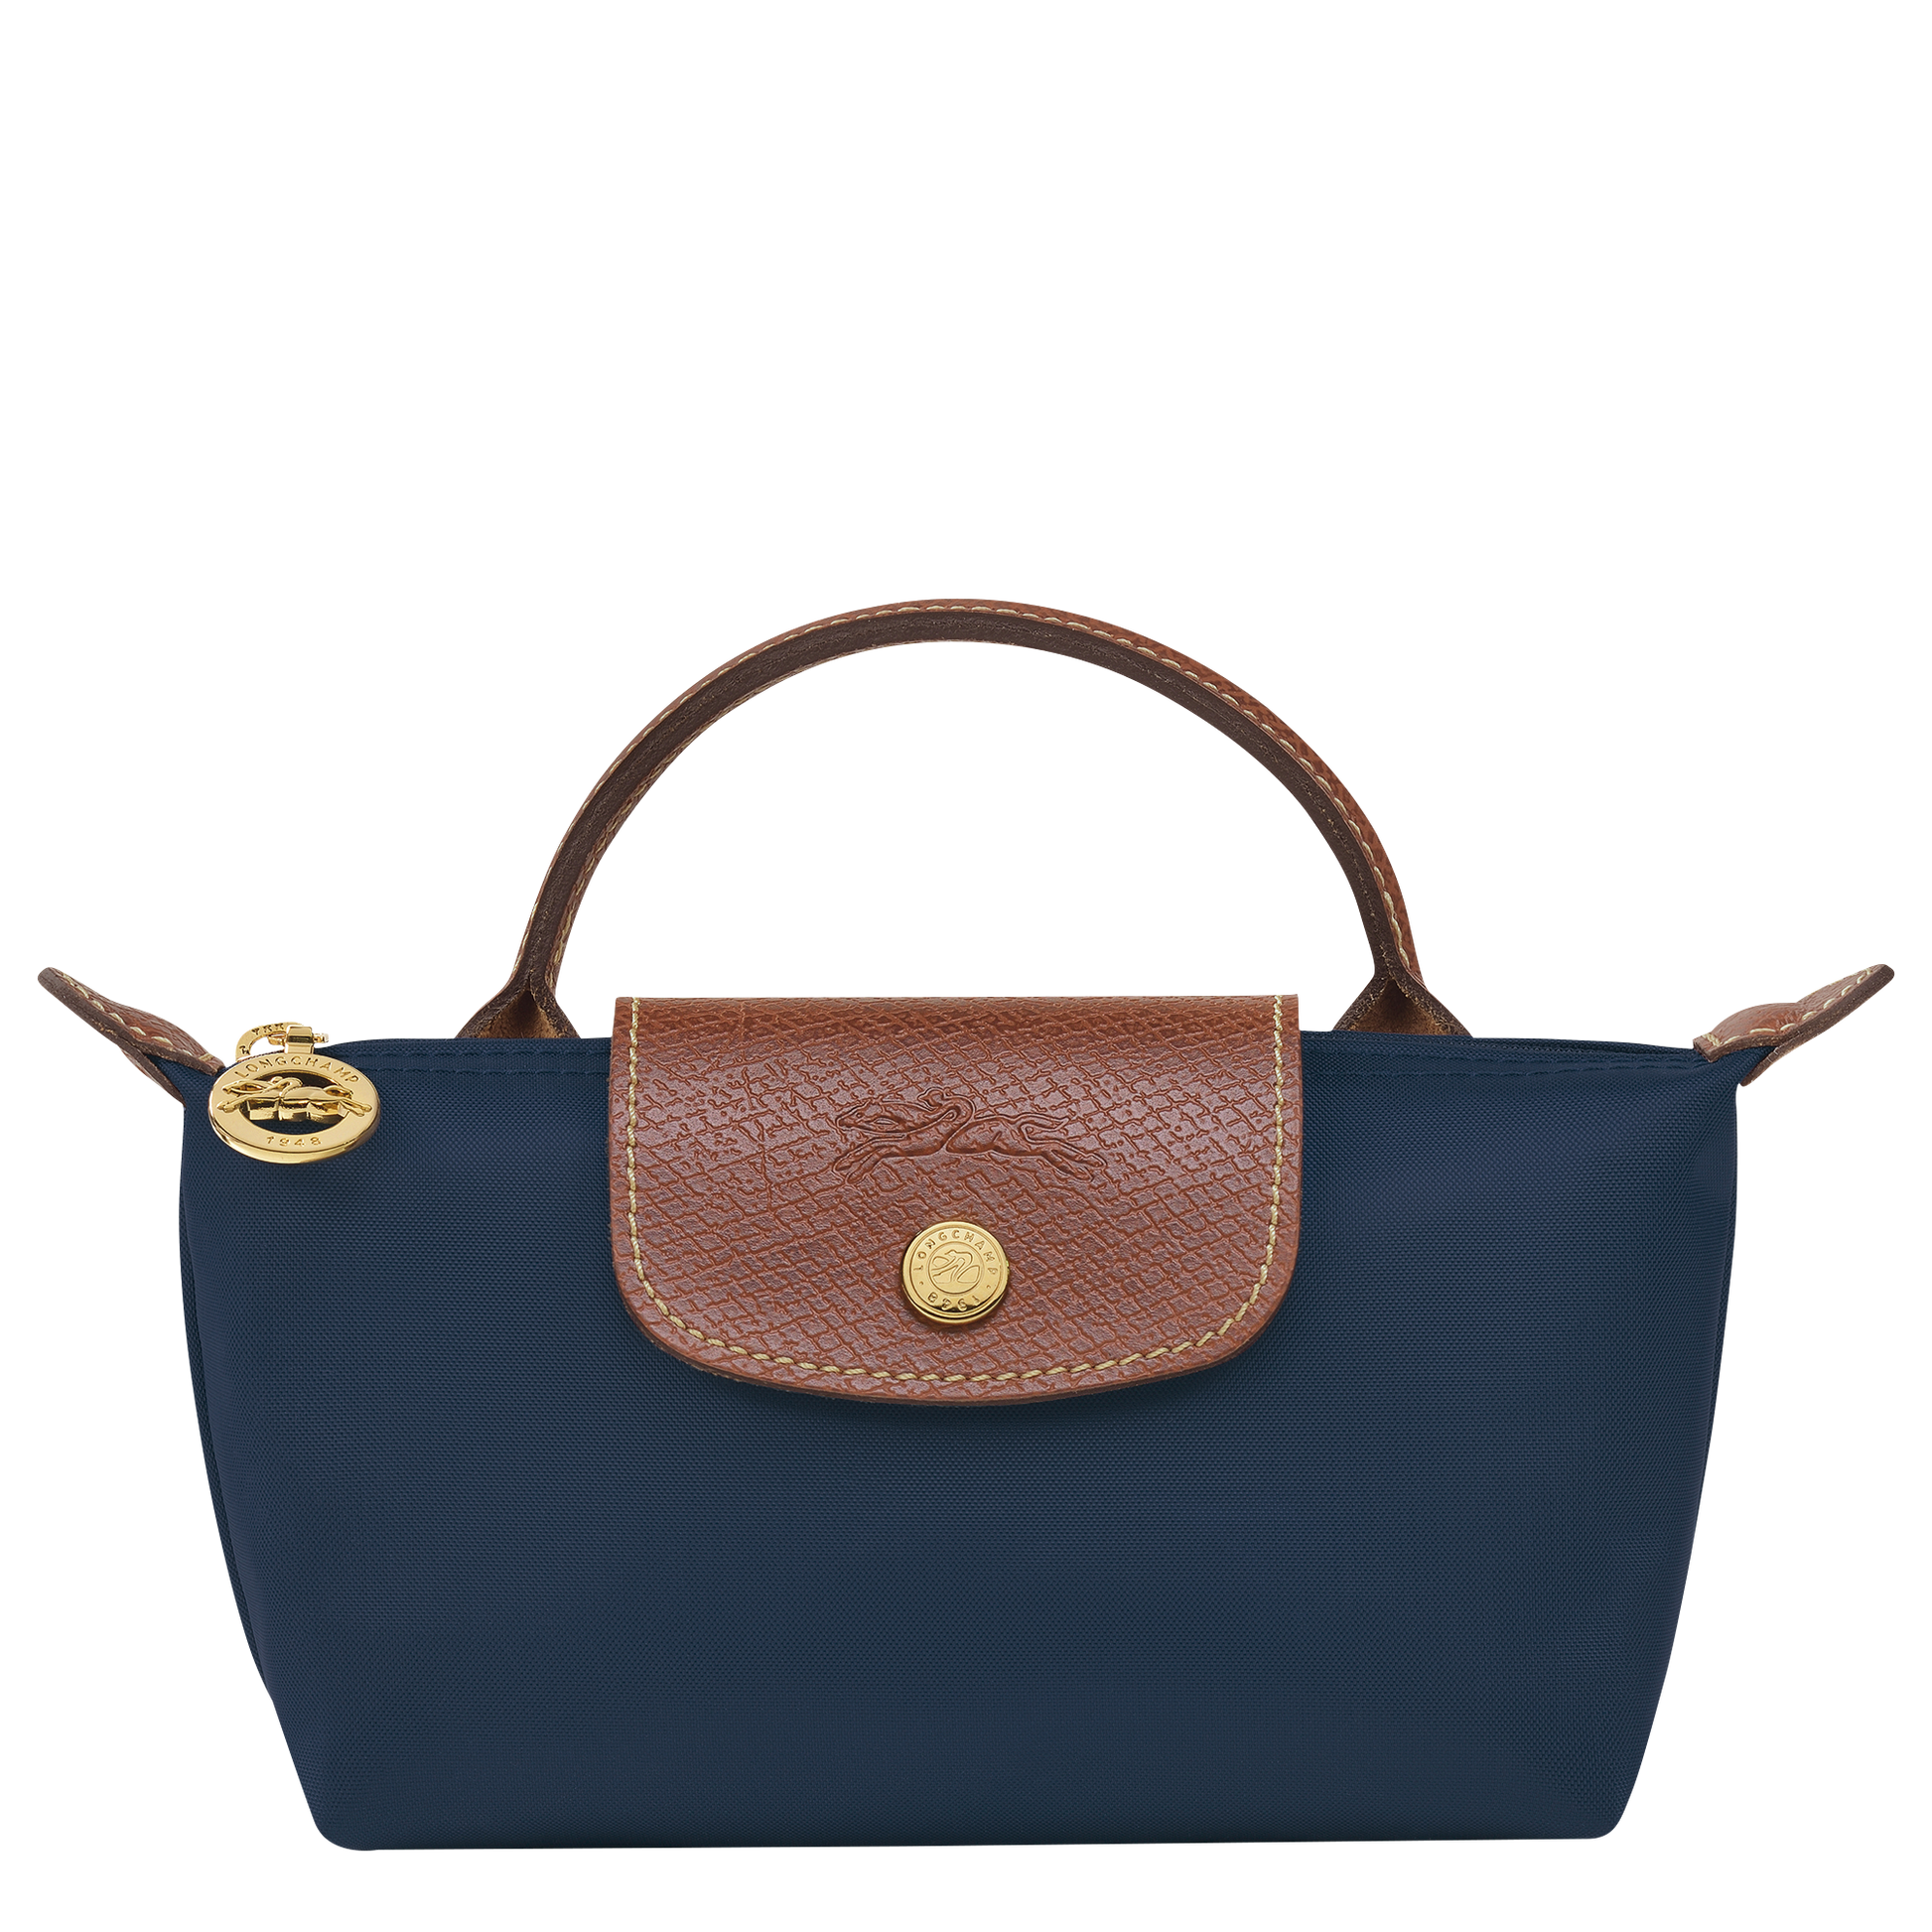 Longchamp LE PLIAGE ORIGINAL - Pouch with handle in Navy - 1 (SKU: 34175089P68)